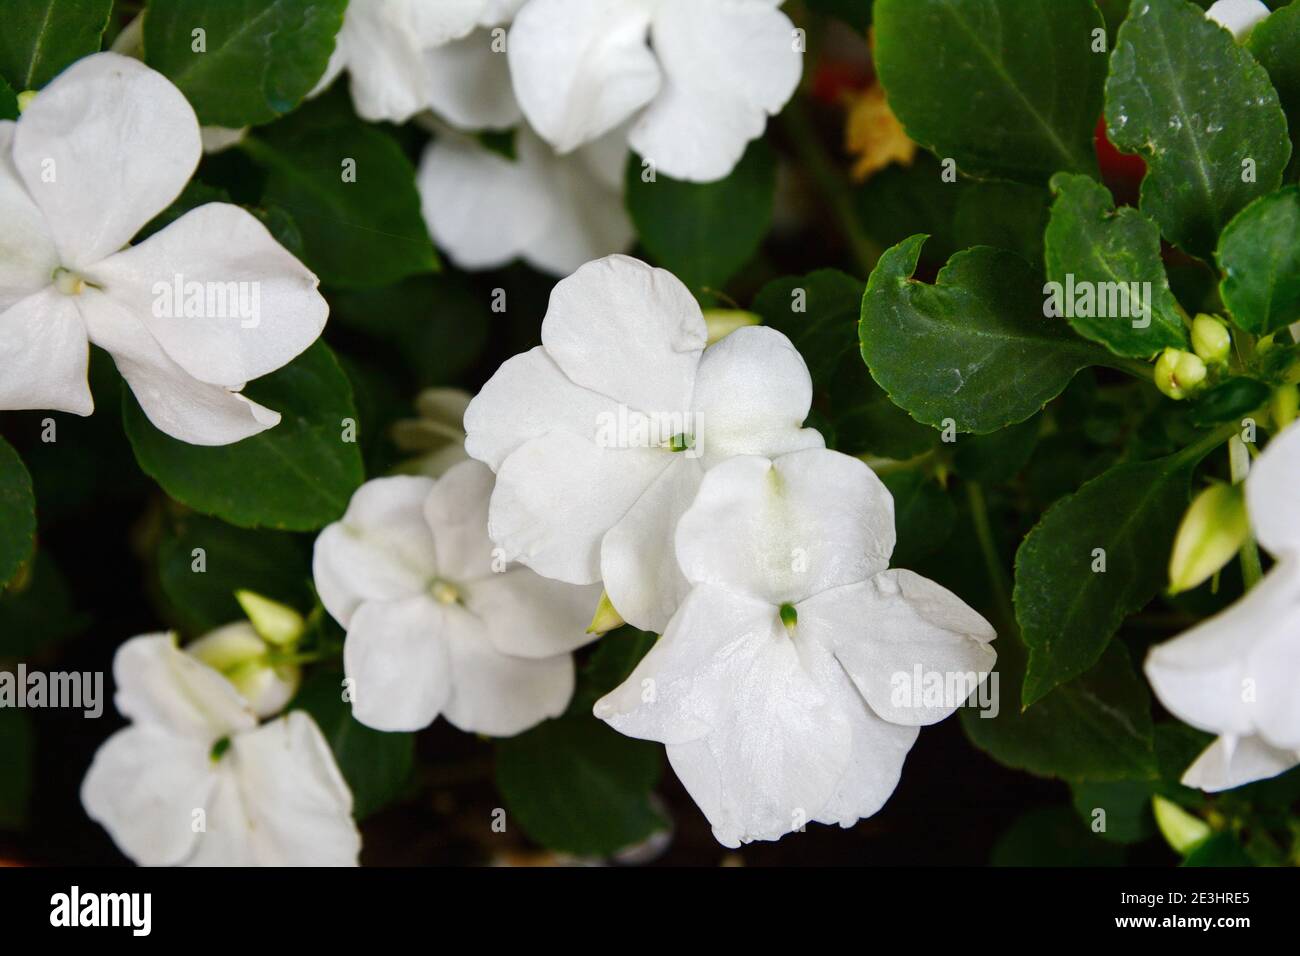 white impatiens close up, scientific name Impatiens walleriana flowers also called Balsam, flowerbed of blossoms in white Stock Photo